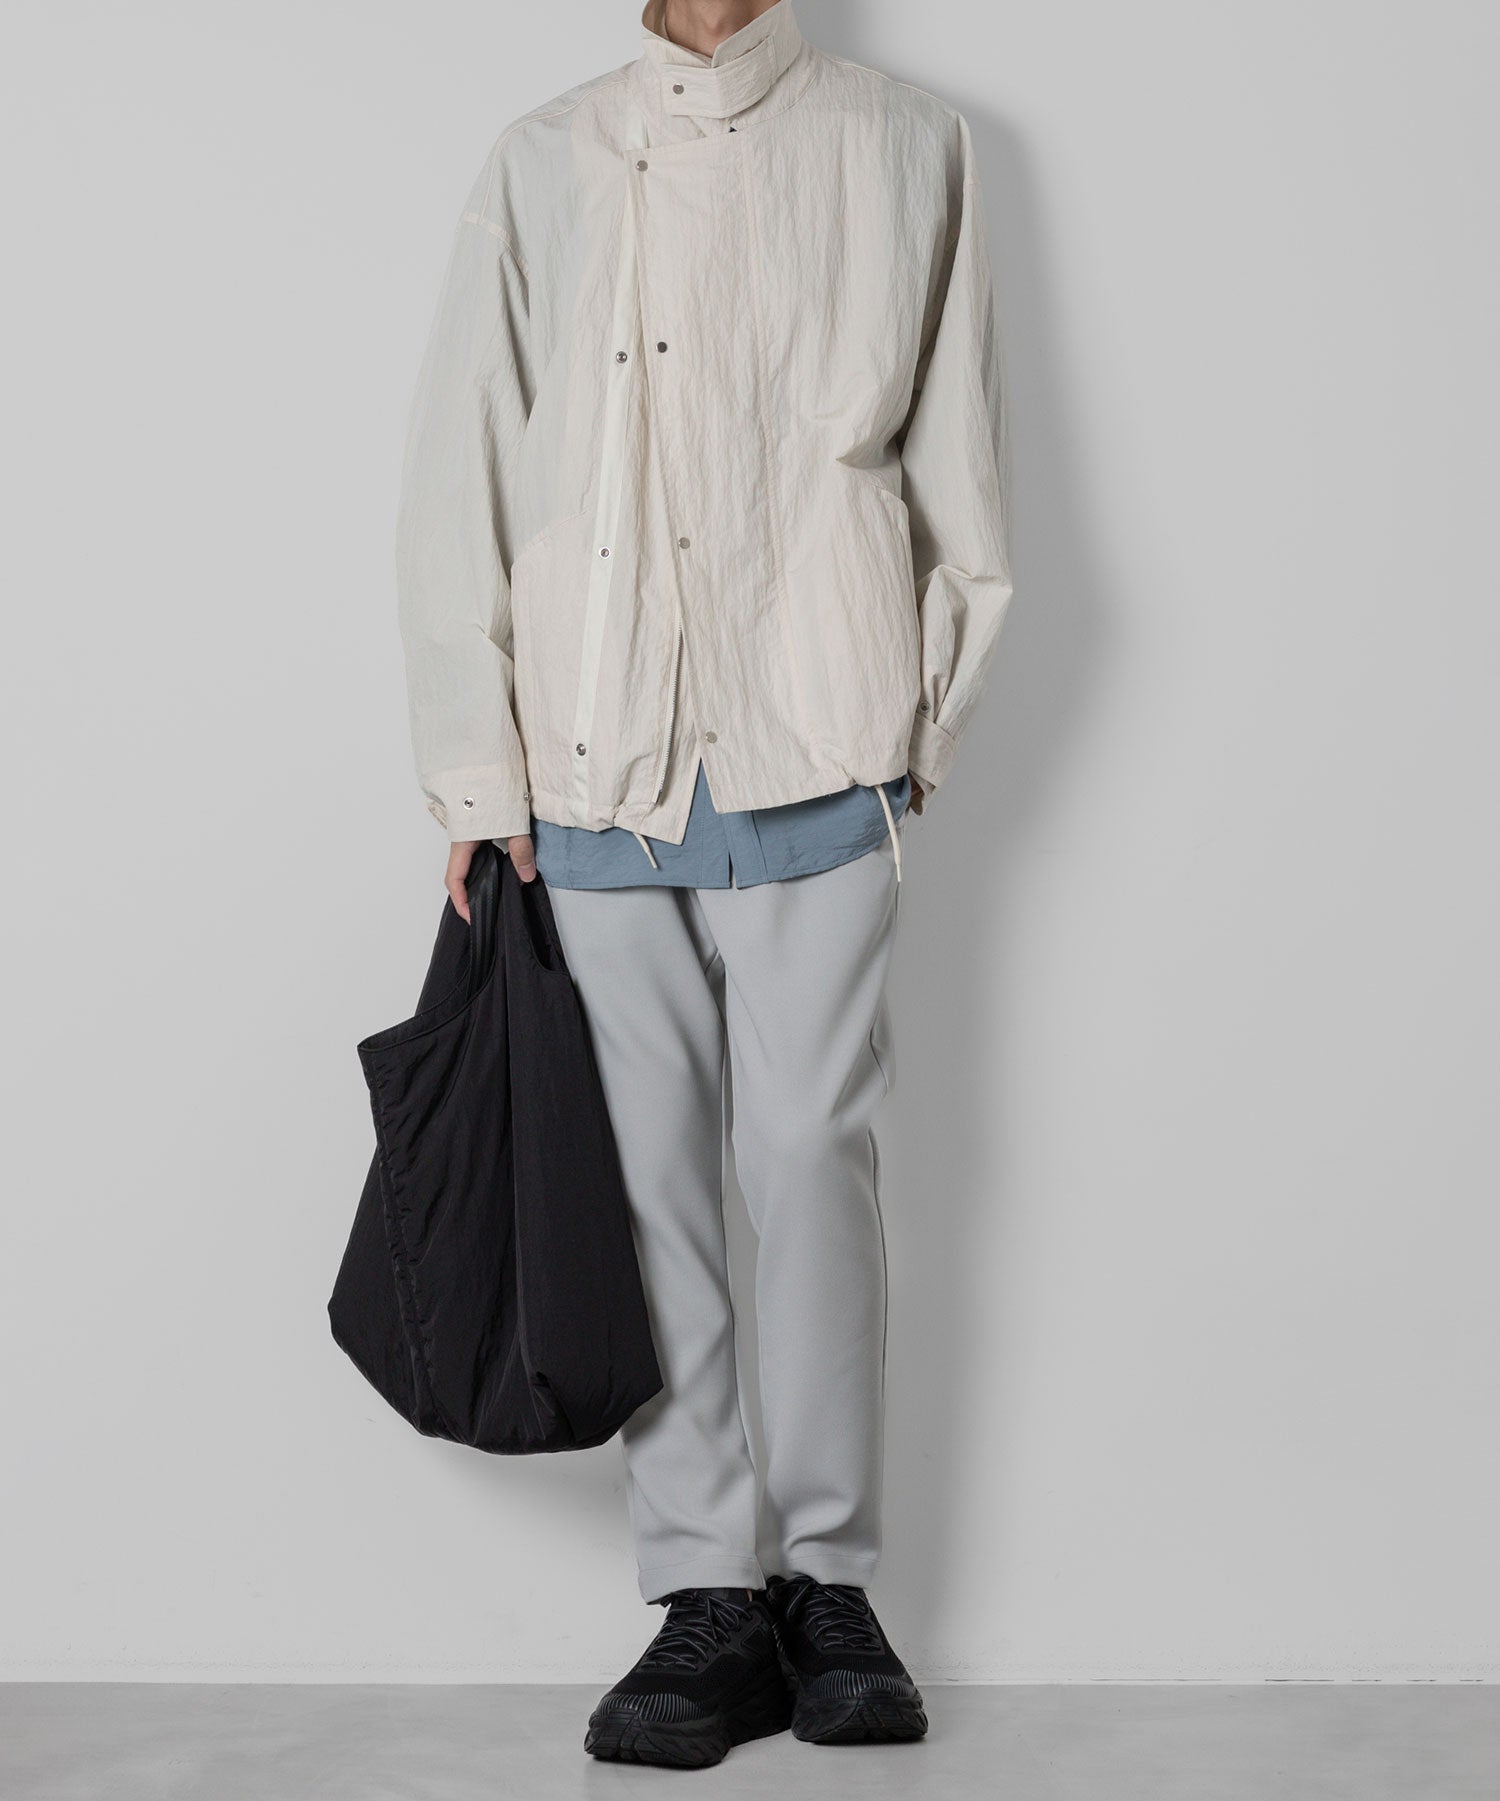 【ATTACHMENT】ATTACHMENT アタッチメントのPE STRETCH DOUBLE CLOTH REGULAR FIT EASY TROUSERS - L.GRAY 公式通販サイトsession福岡セレクトショップ